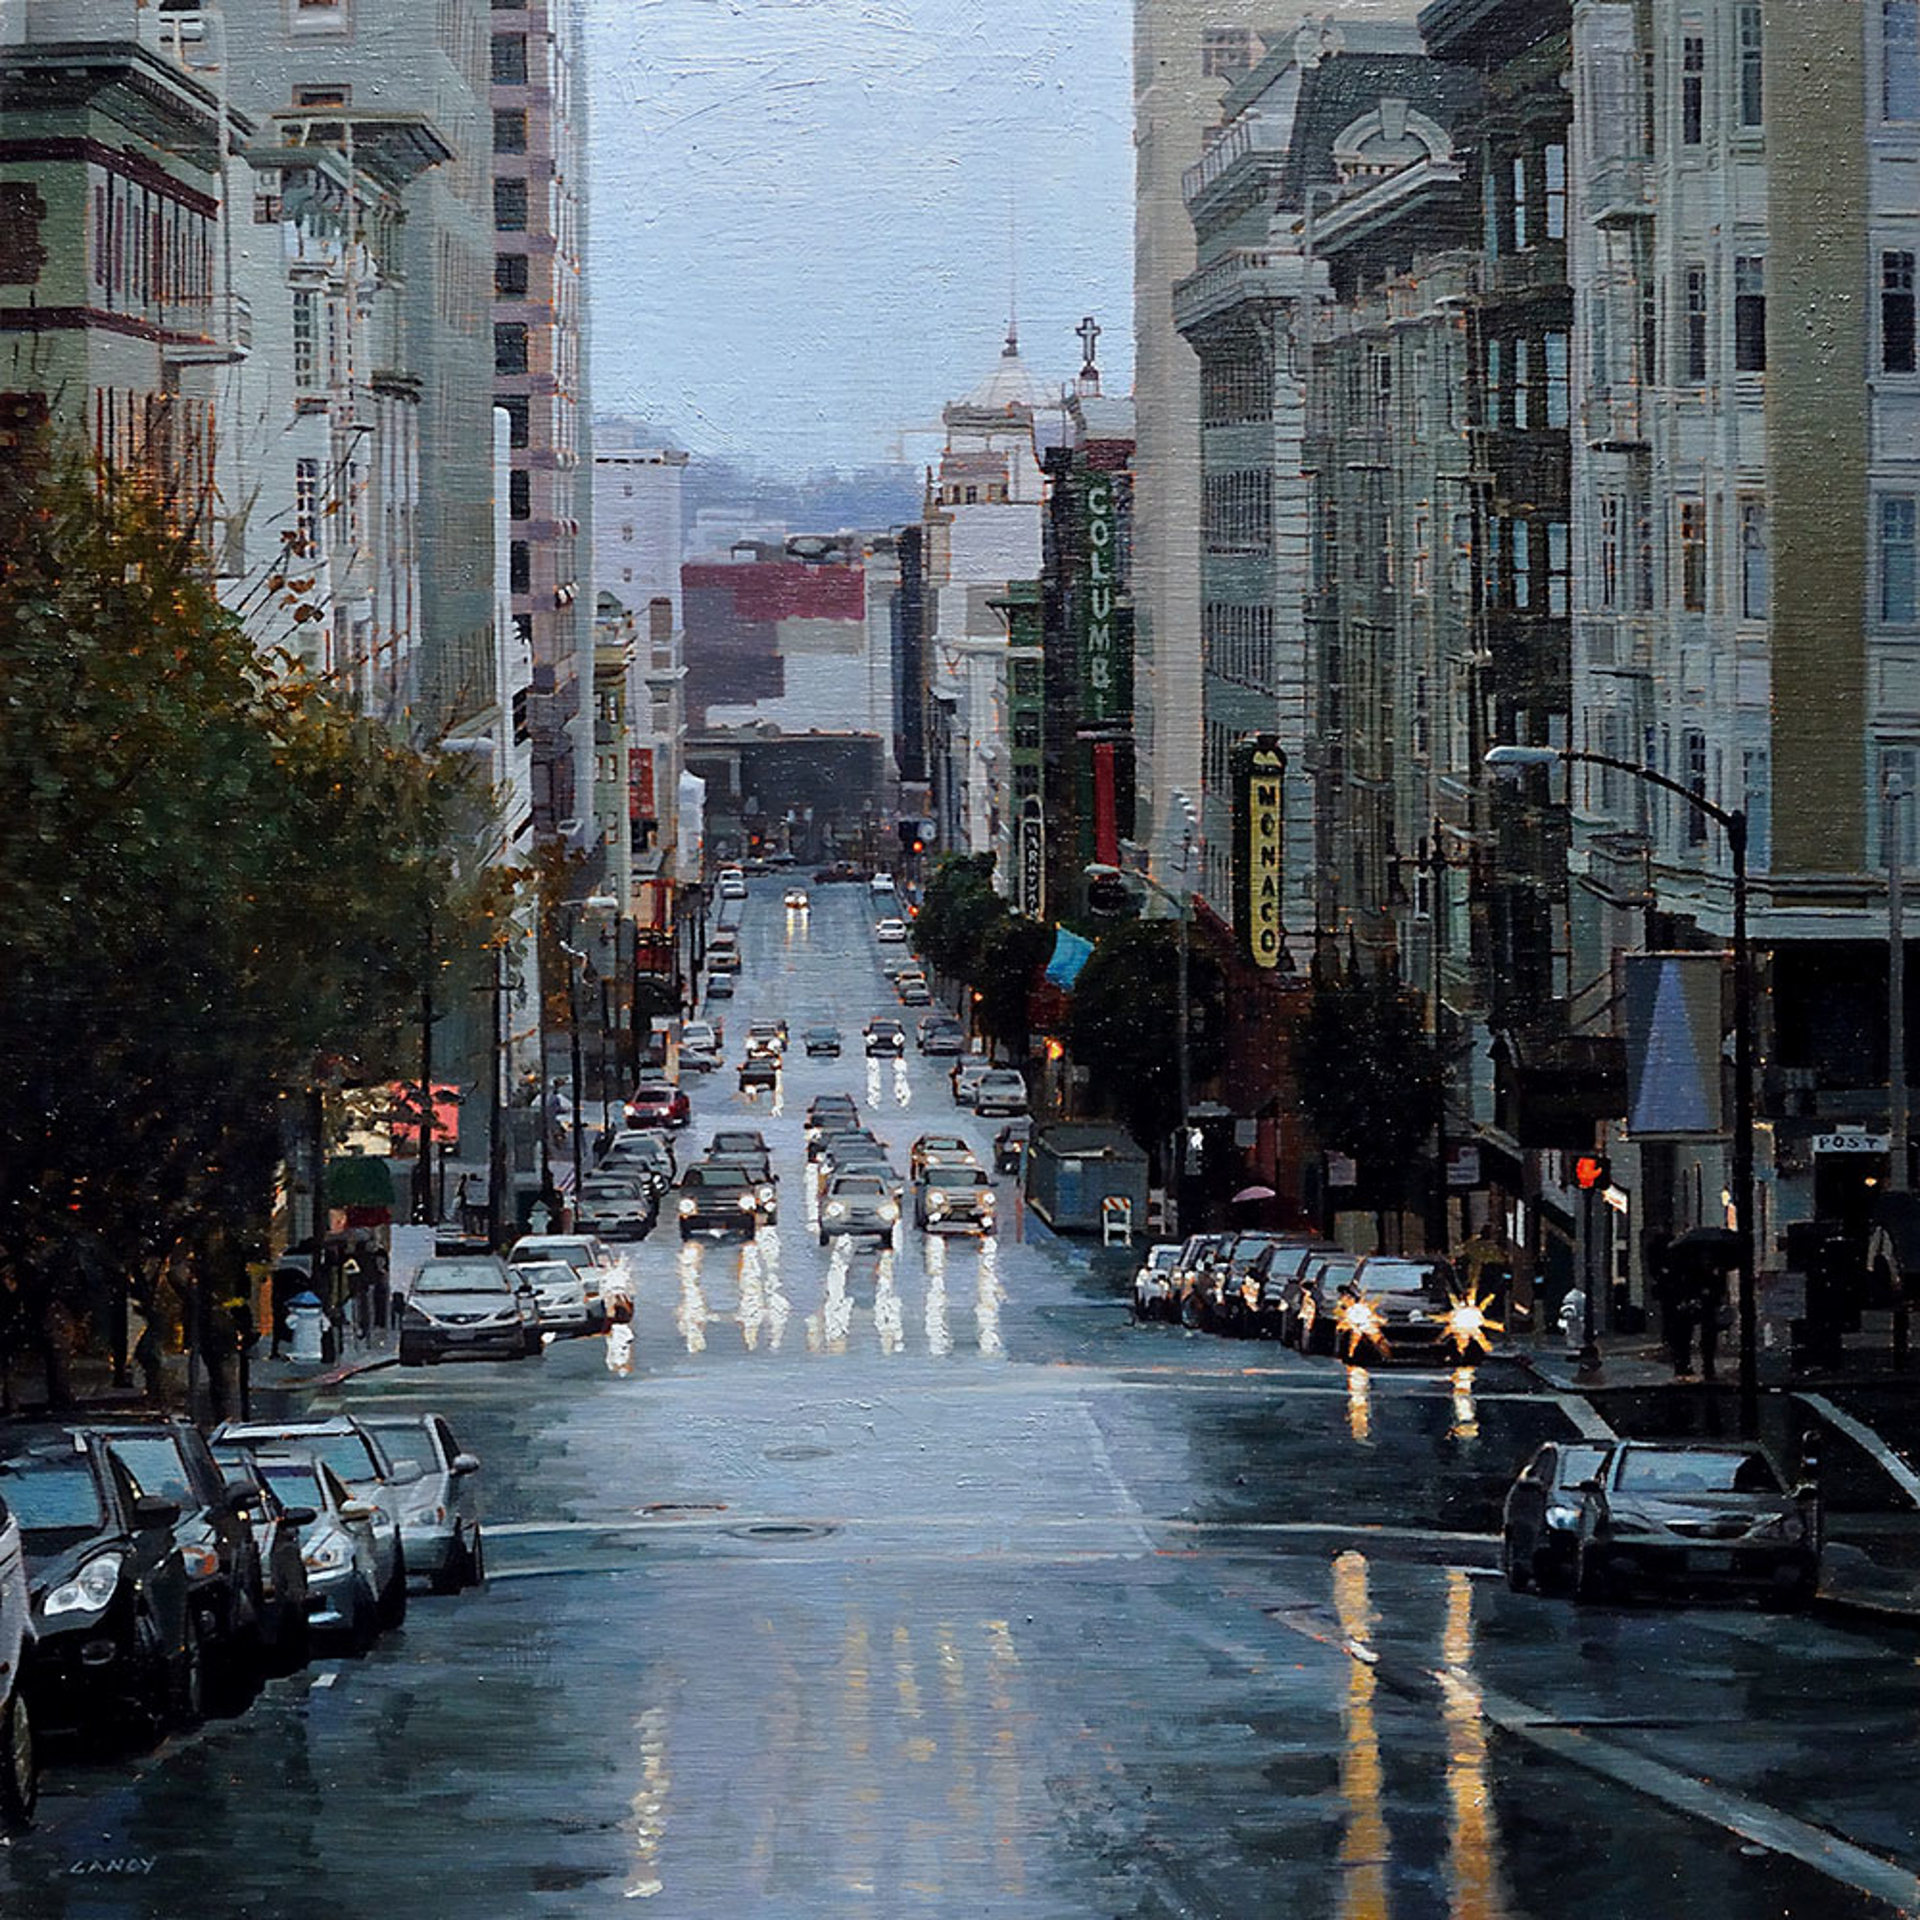 Looking Down Taylor Street by Greg Gandy